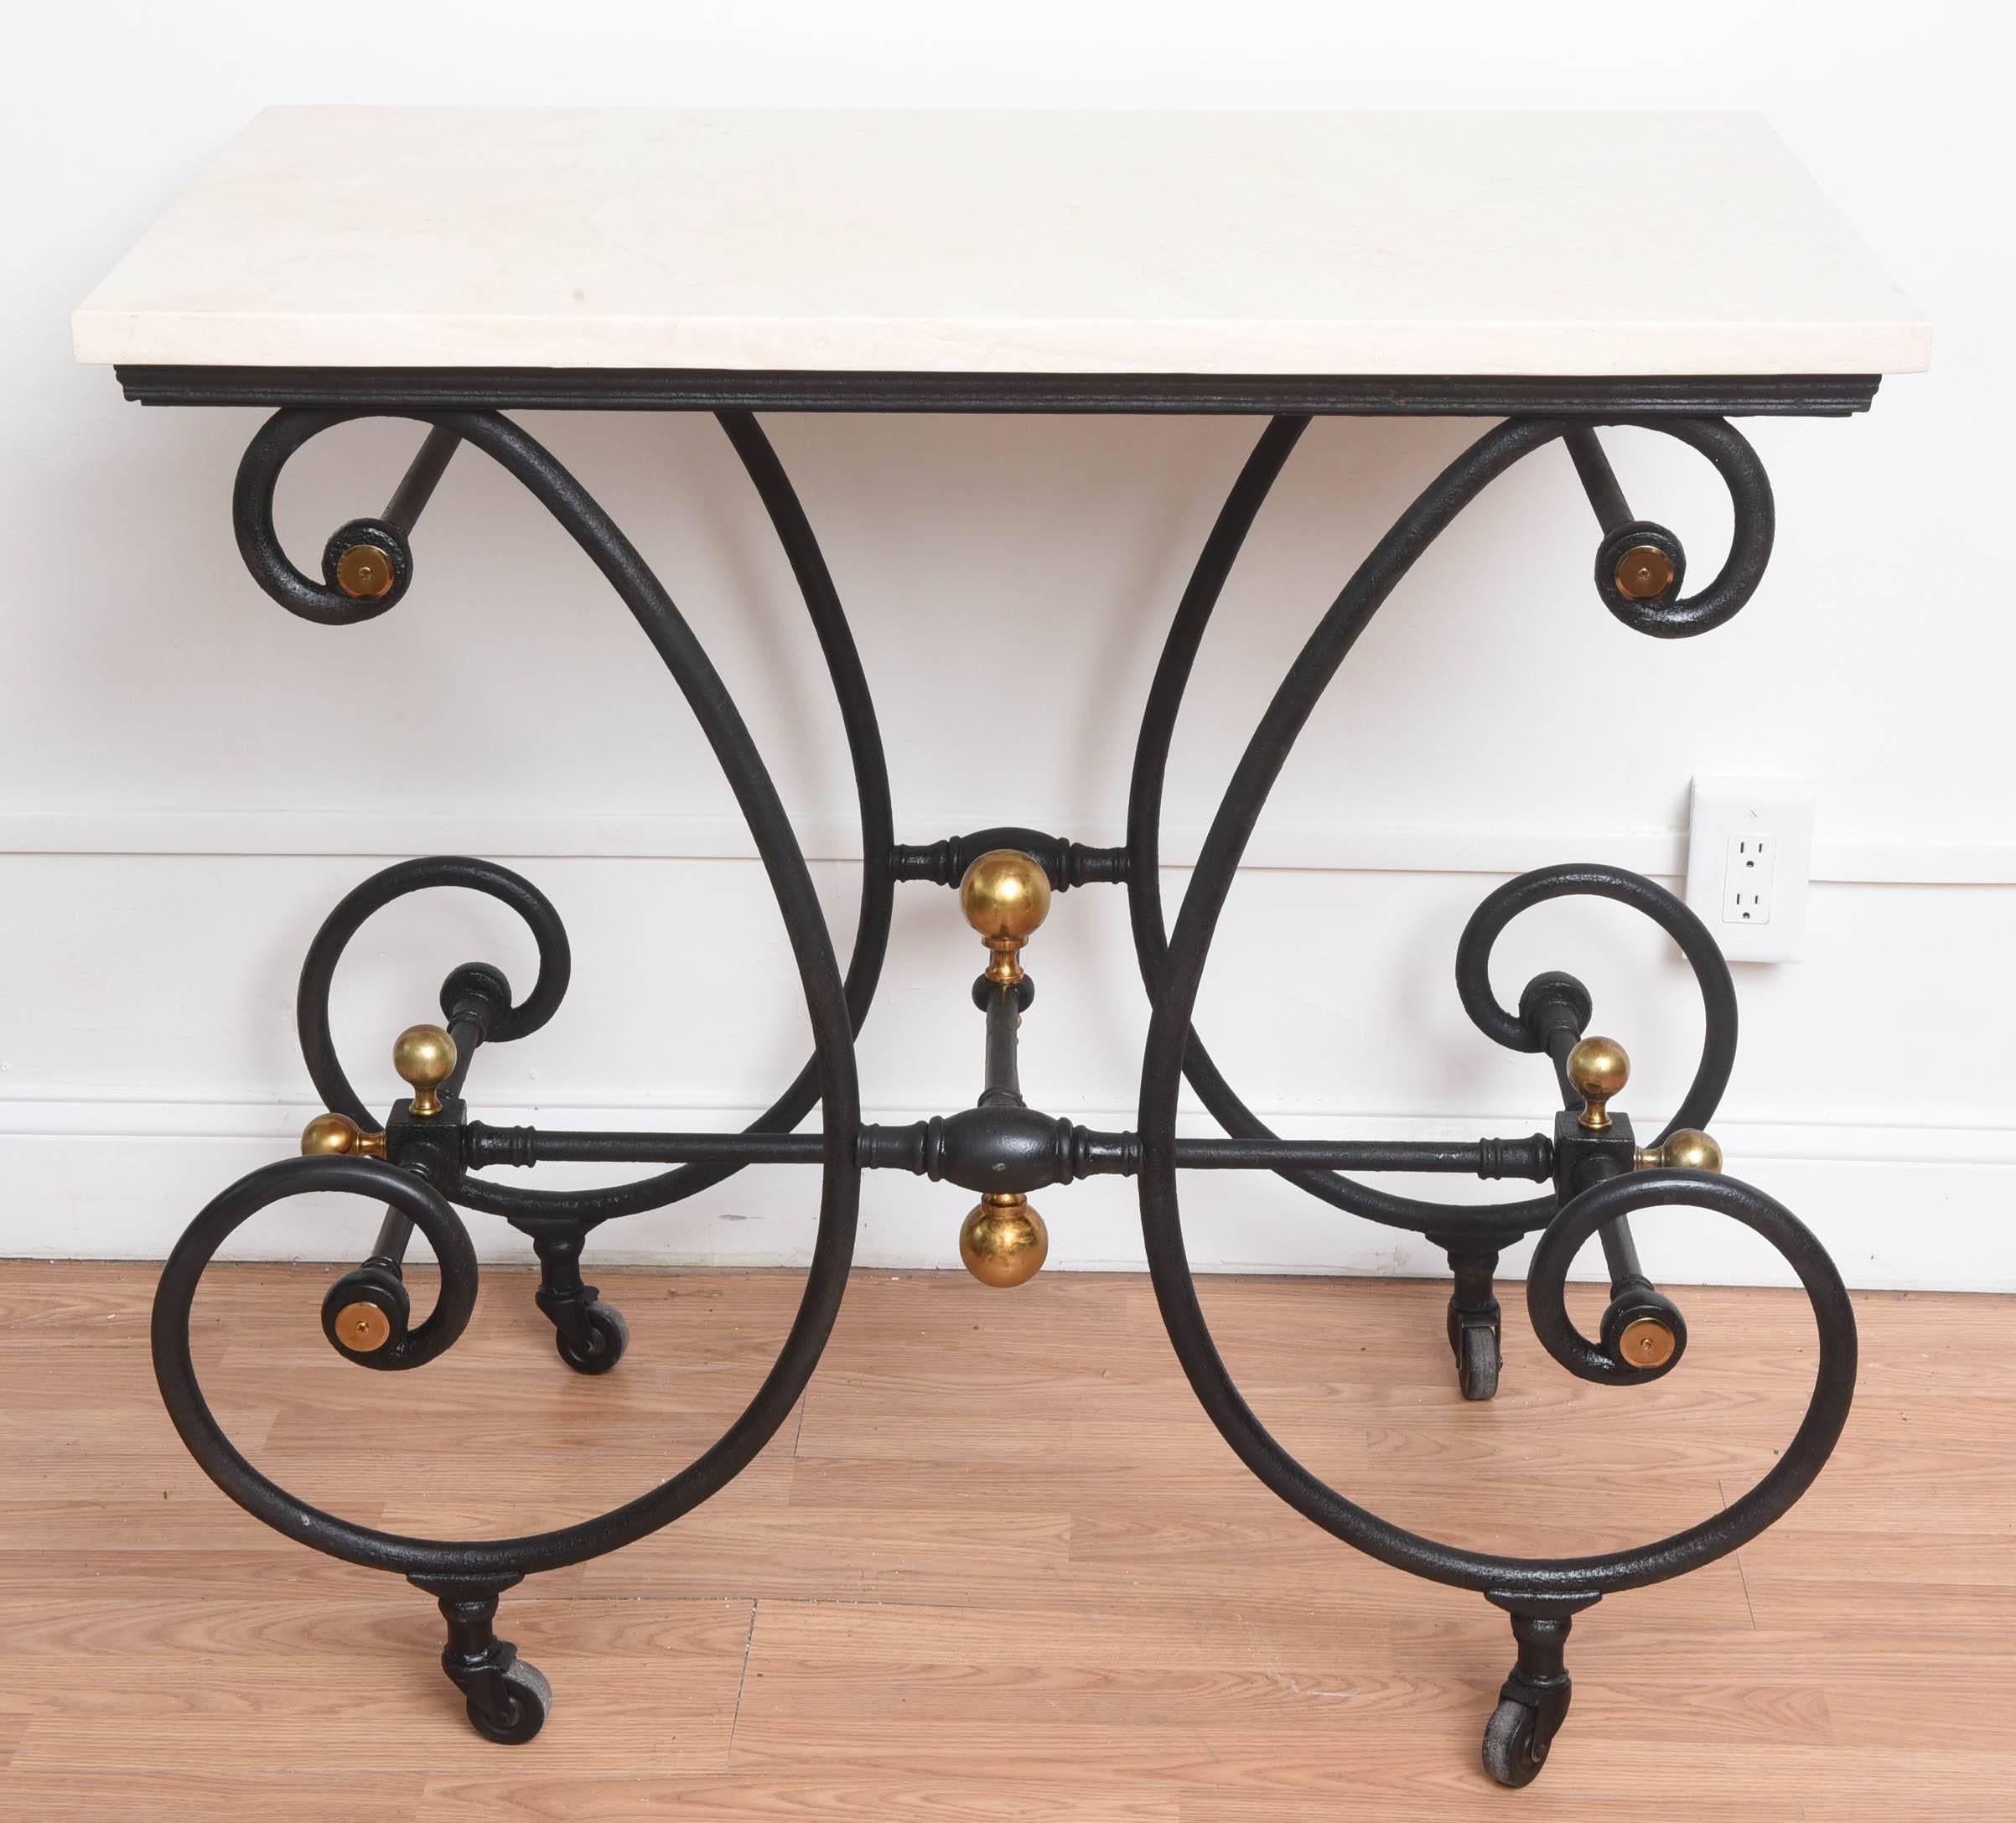 19th century French Bakers table, iron and brass with marble top. Paint black on casters.